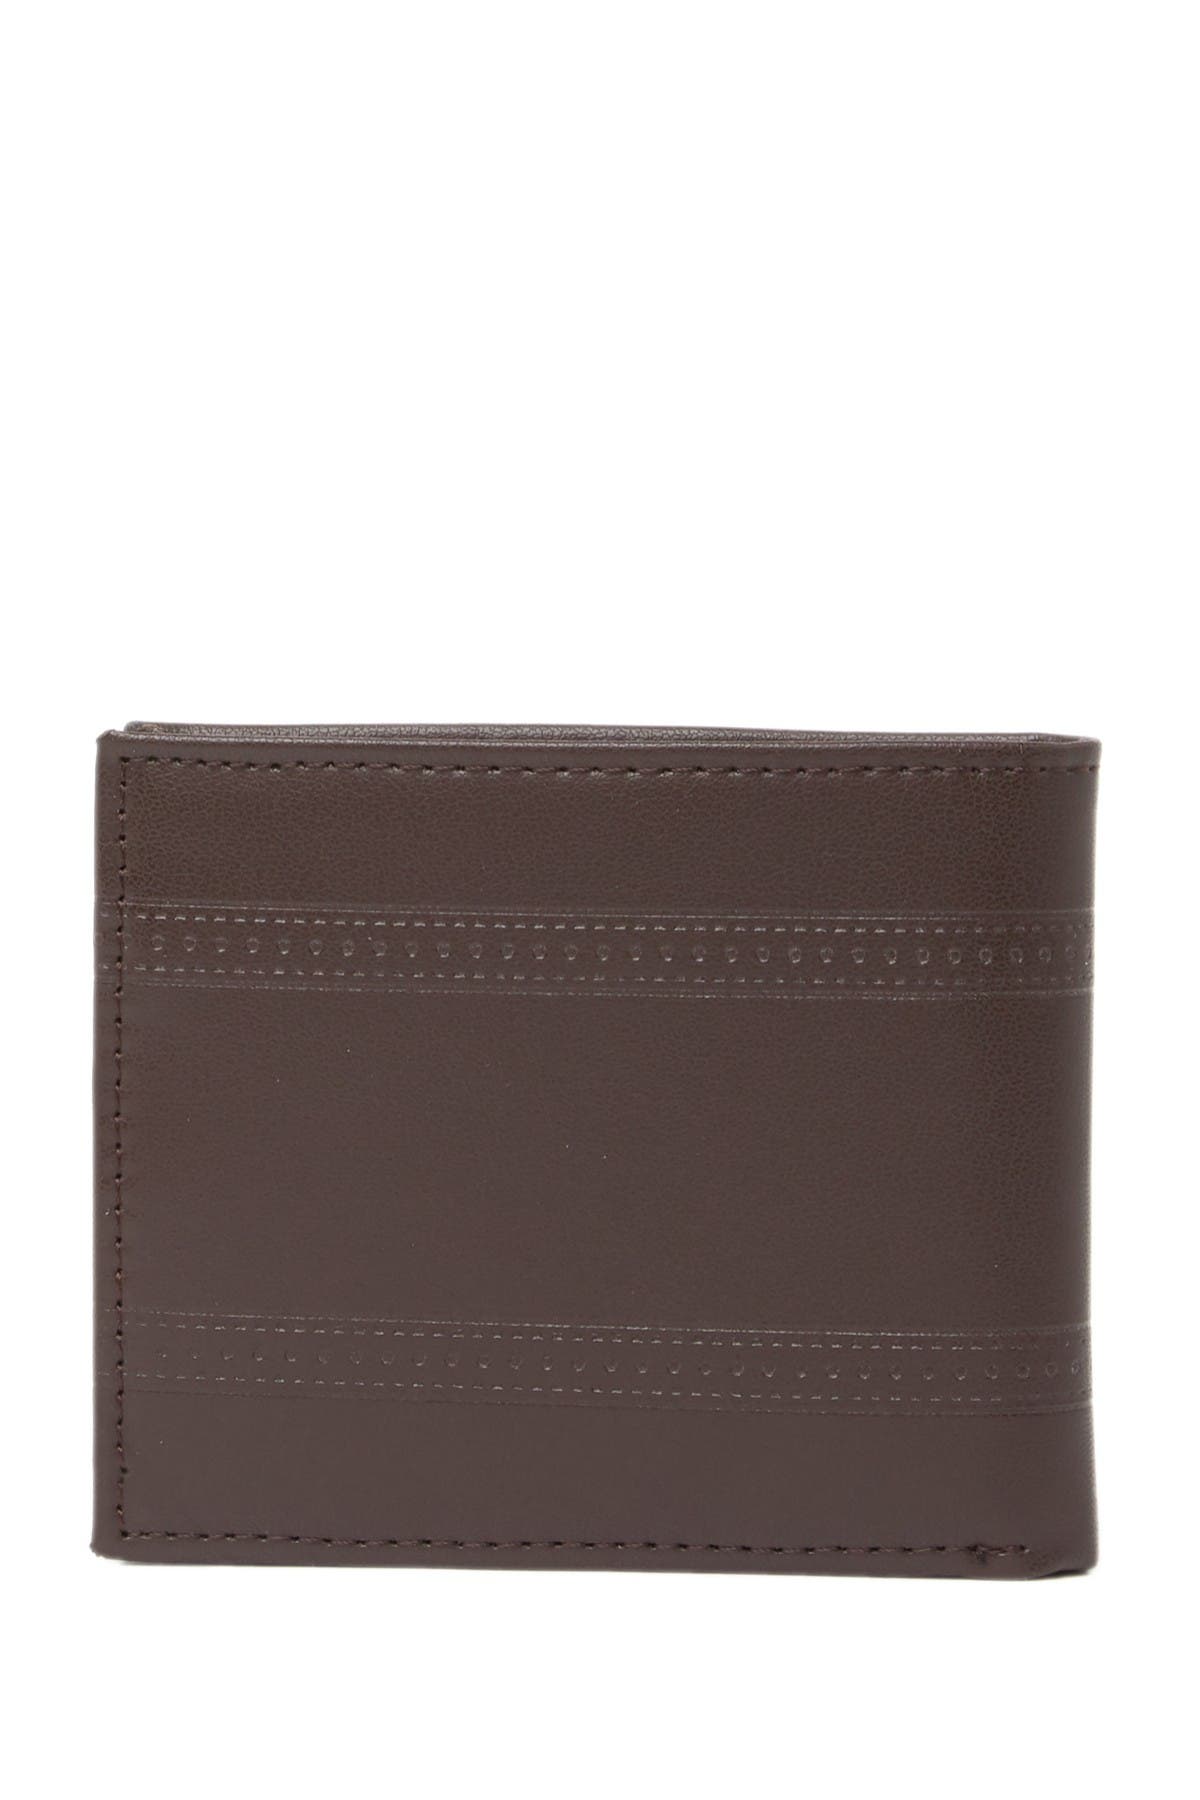 Tallia | Bifold Leather Wallet with Embossed Pattern | Nordstrom Rack